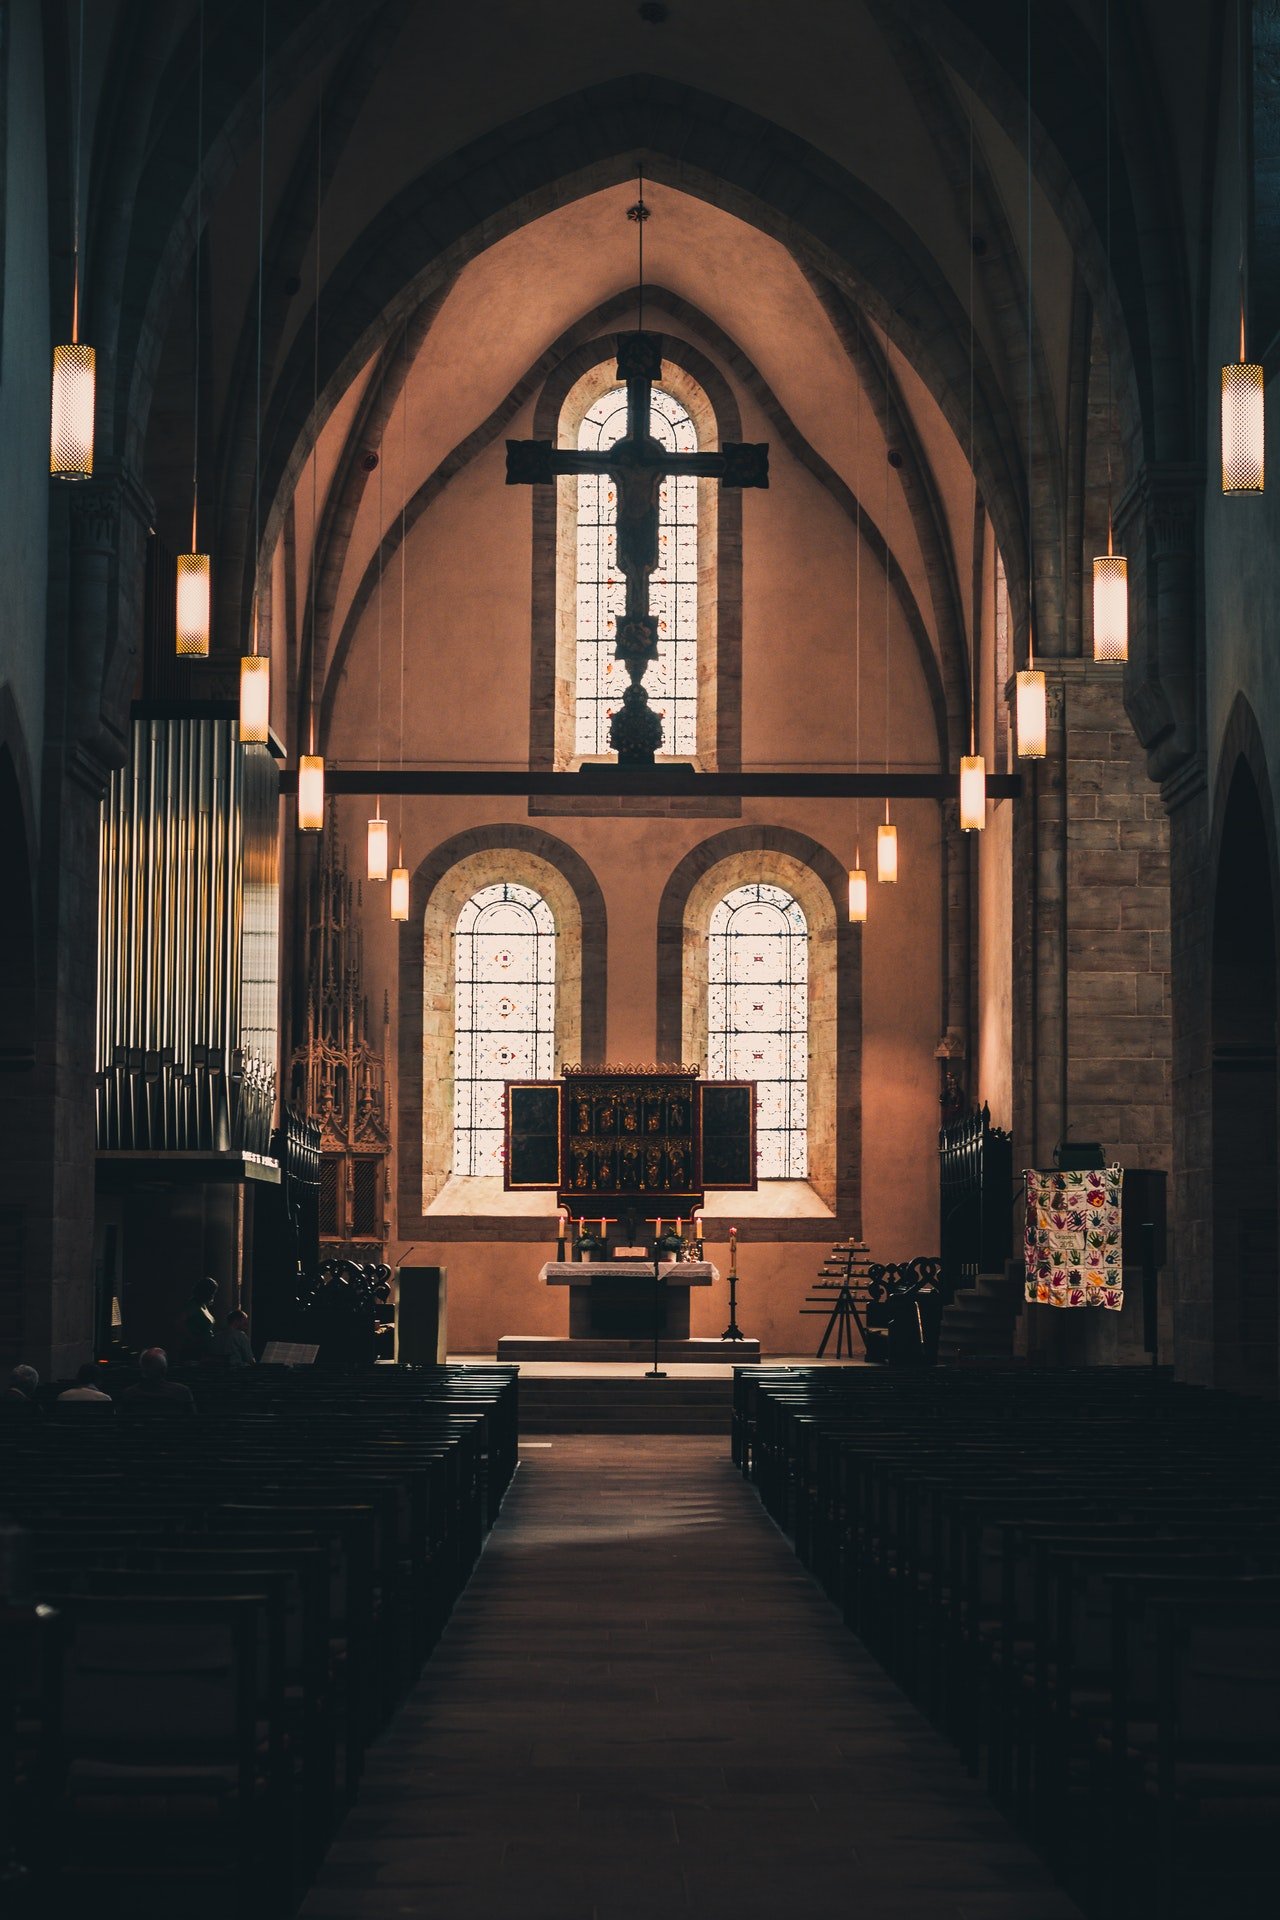 They started going to church on Sundays. | Source: Pexels